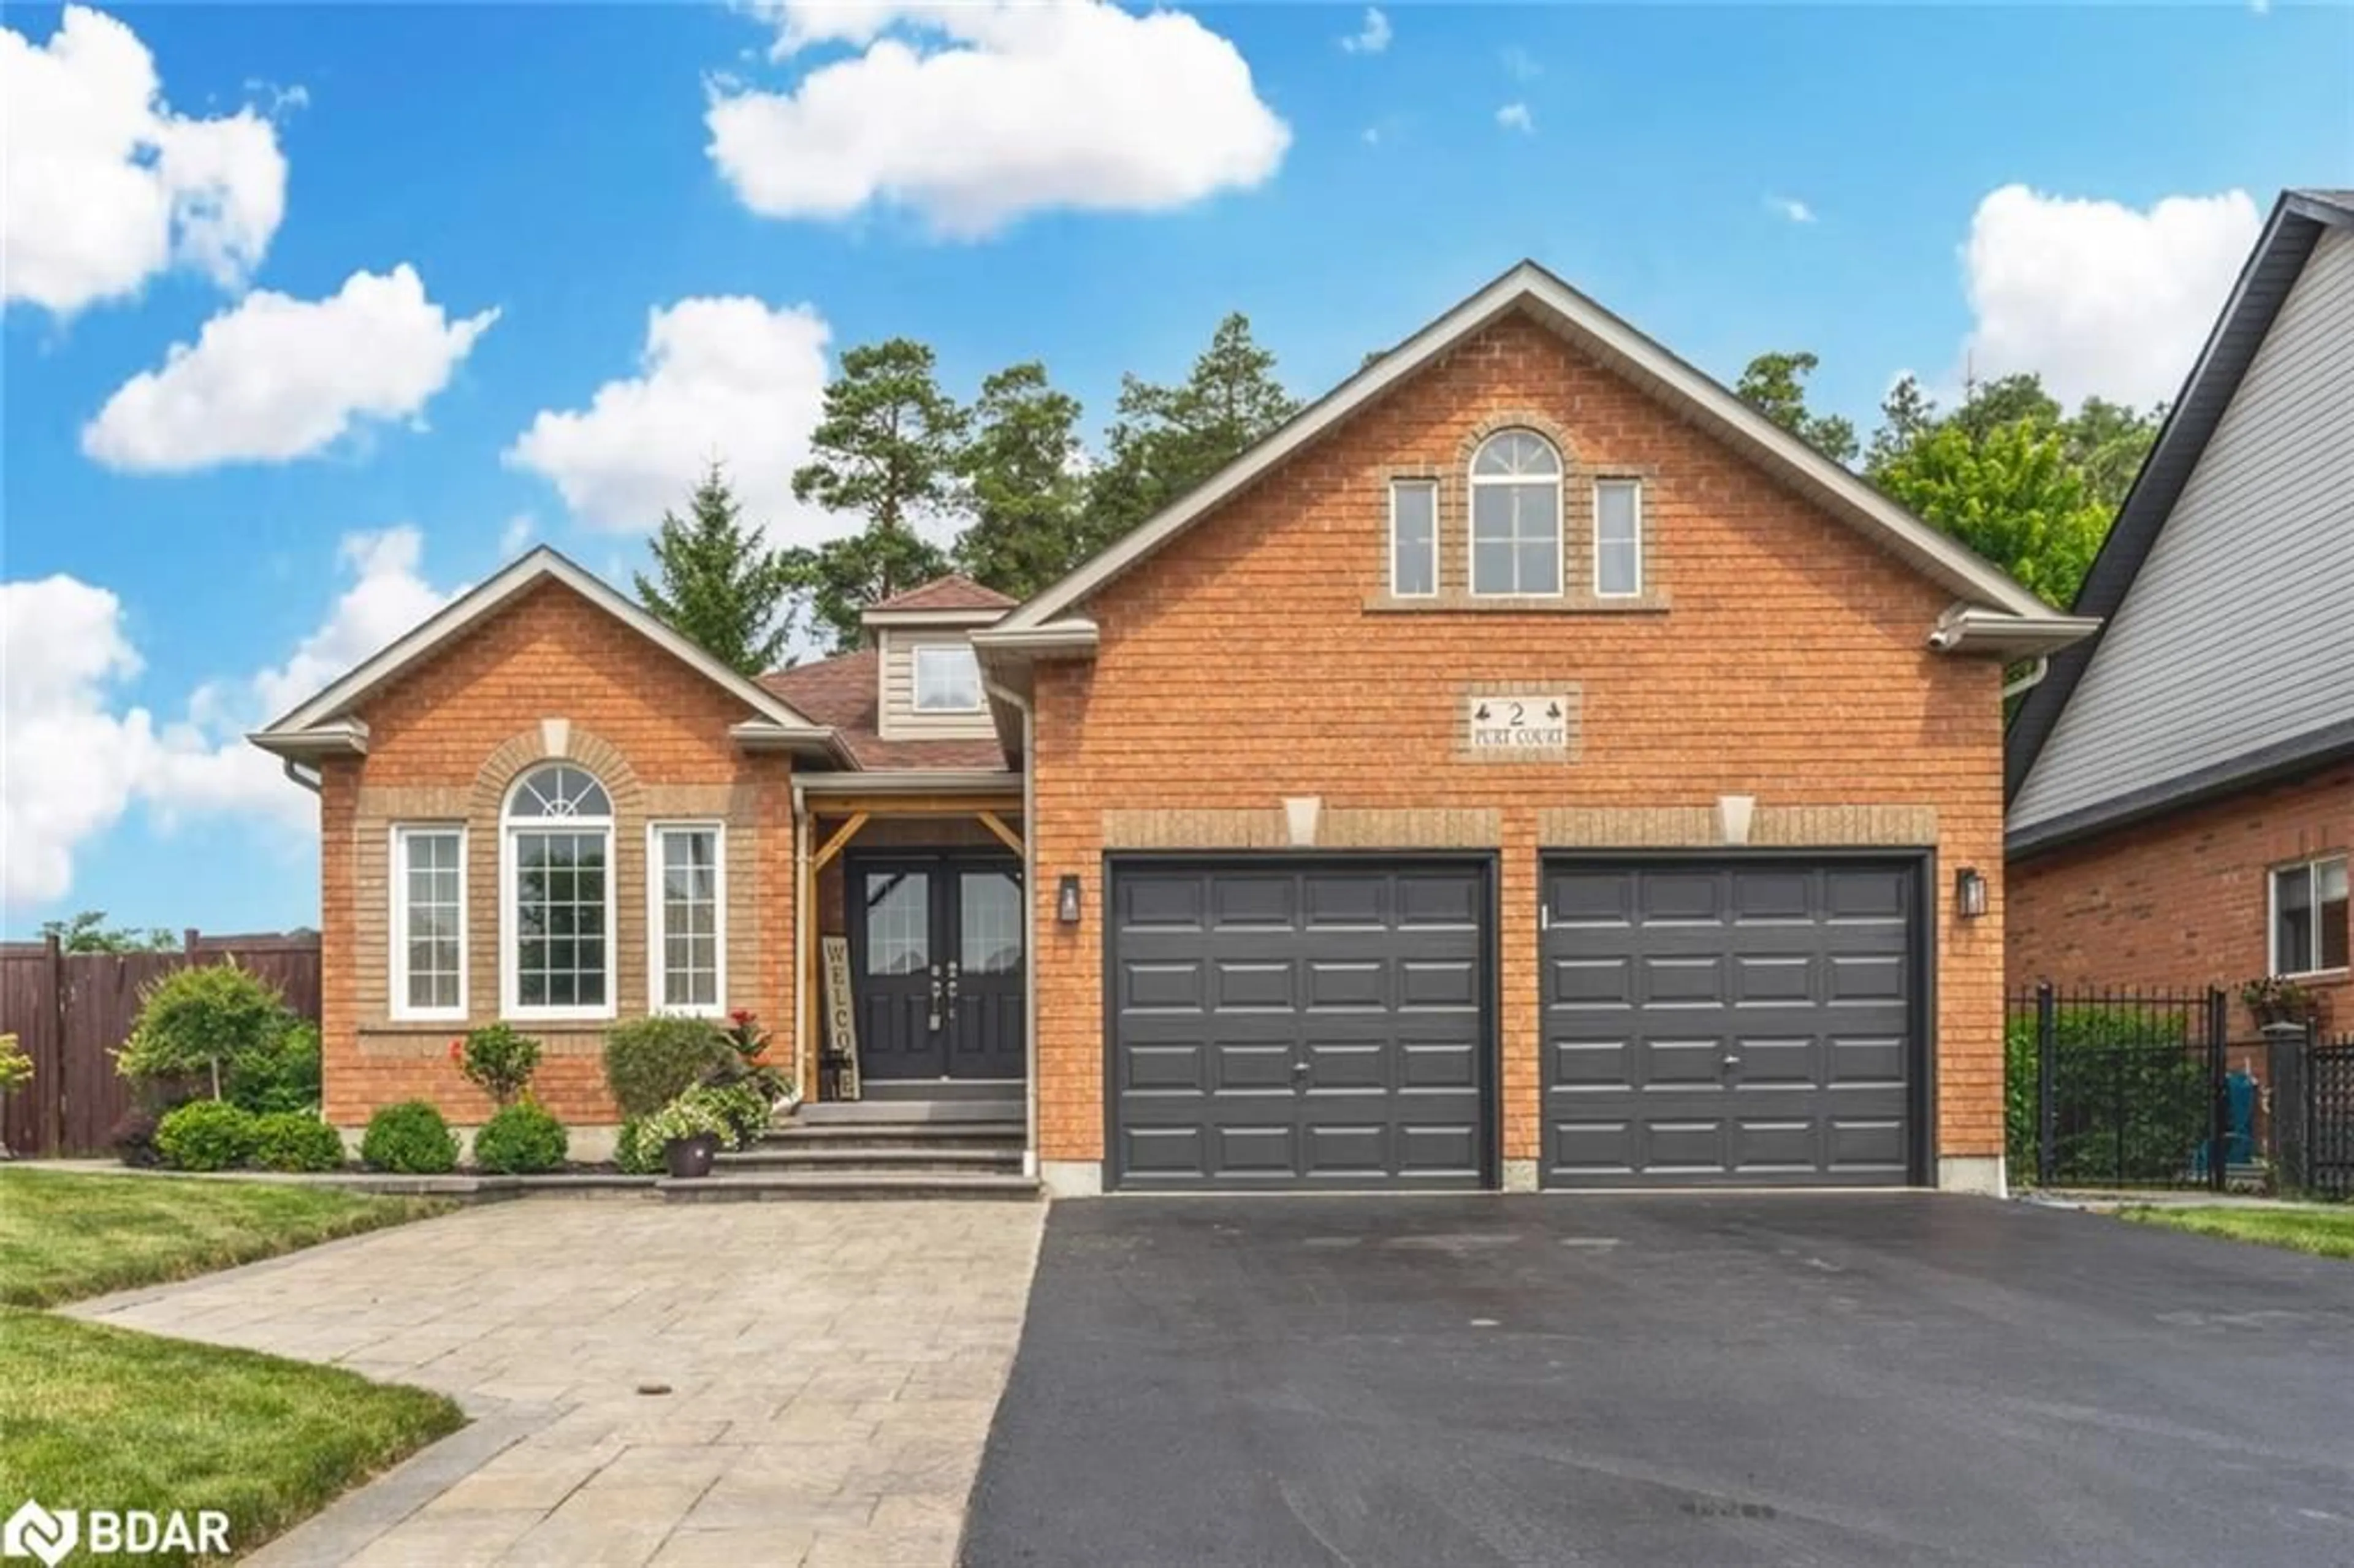 Home with brick exterior material for 2 Purt Crt, Barrie Ontario L4N 9K7